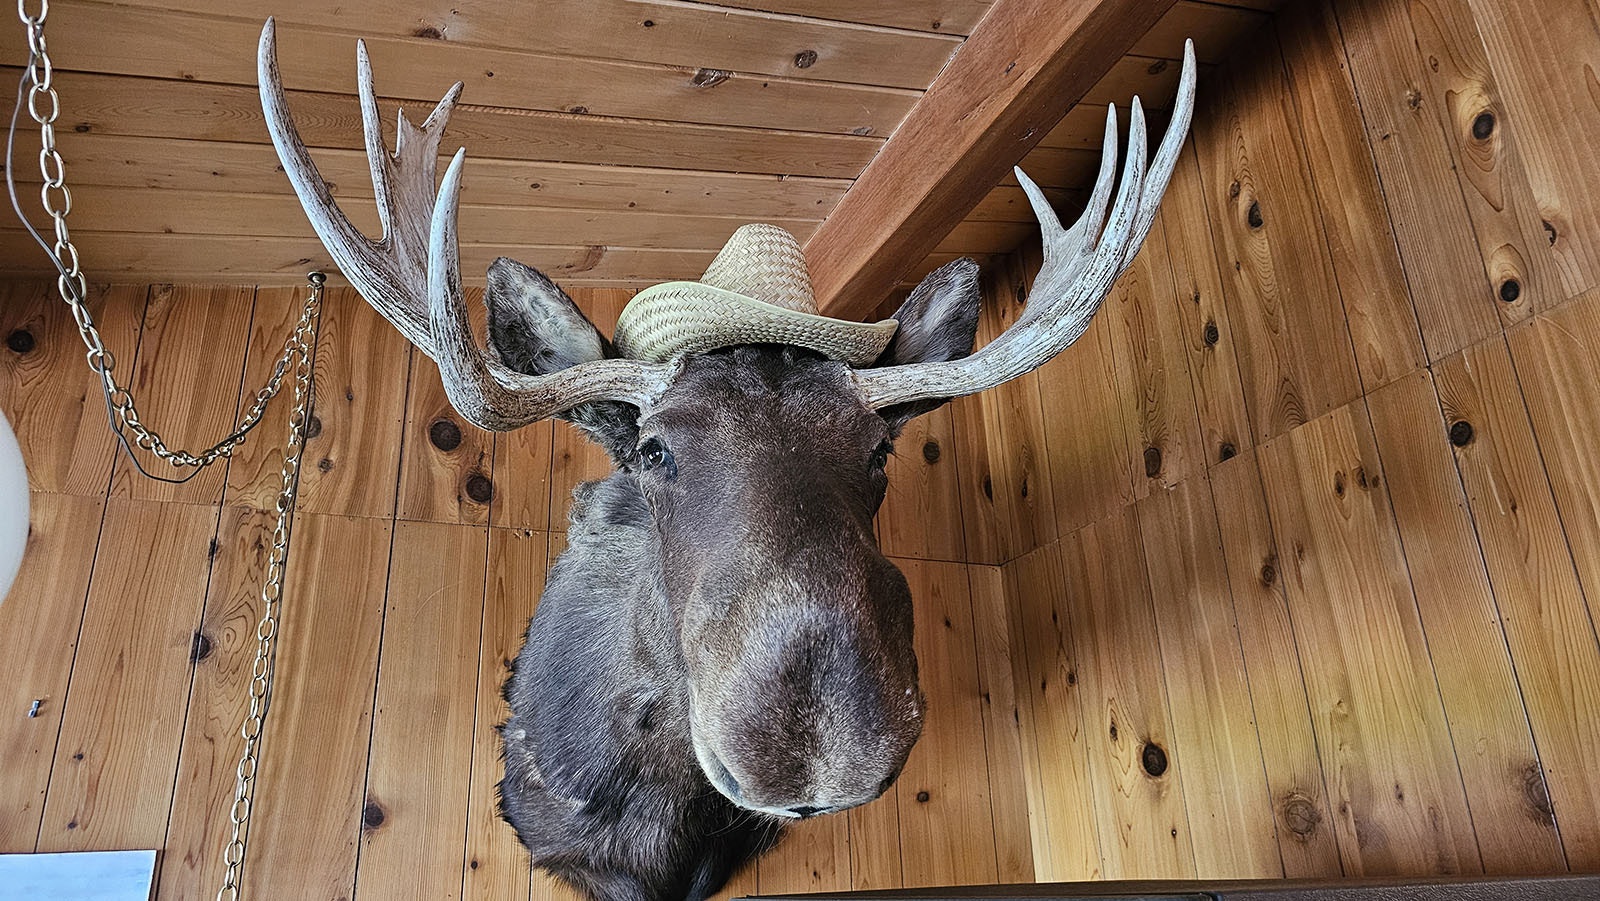 The moose at the Kudar doesn't have a name, but it has a hat. Michael Kudar says the hat was added by his grandma, who decided the hat looked good on him.